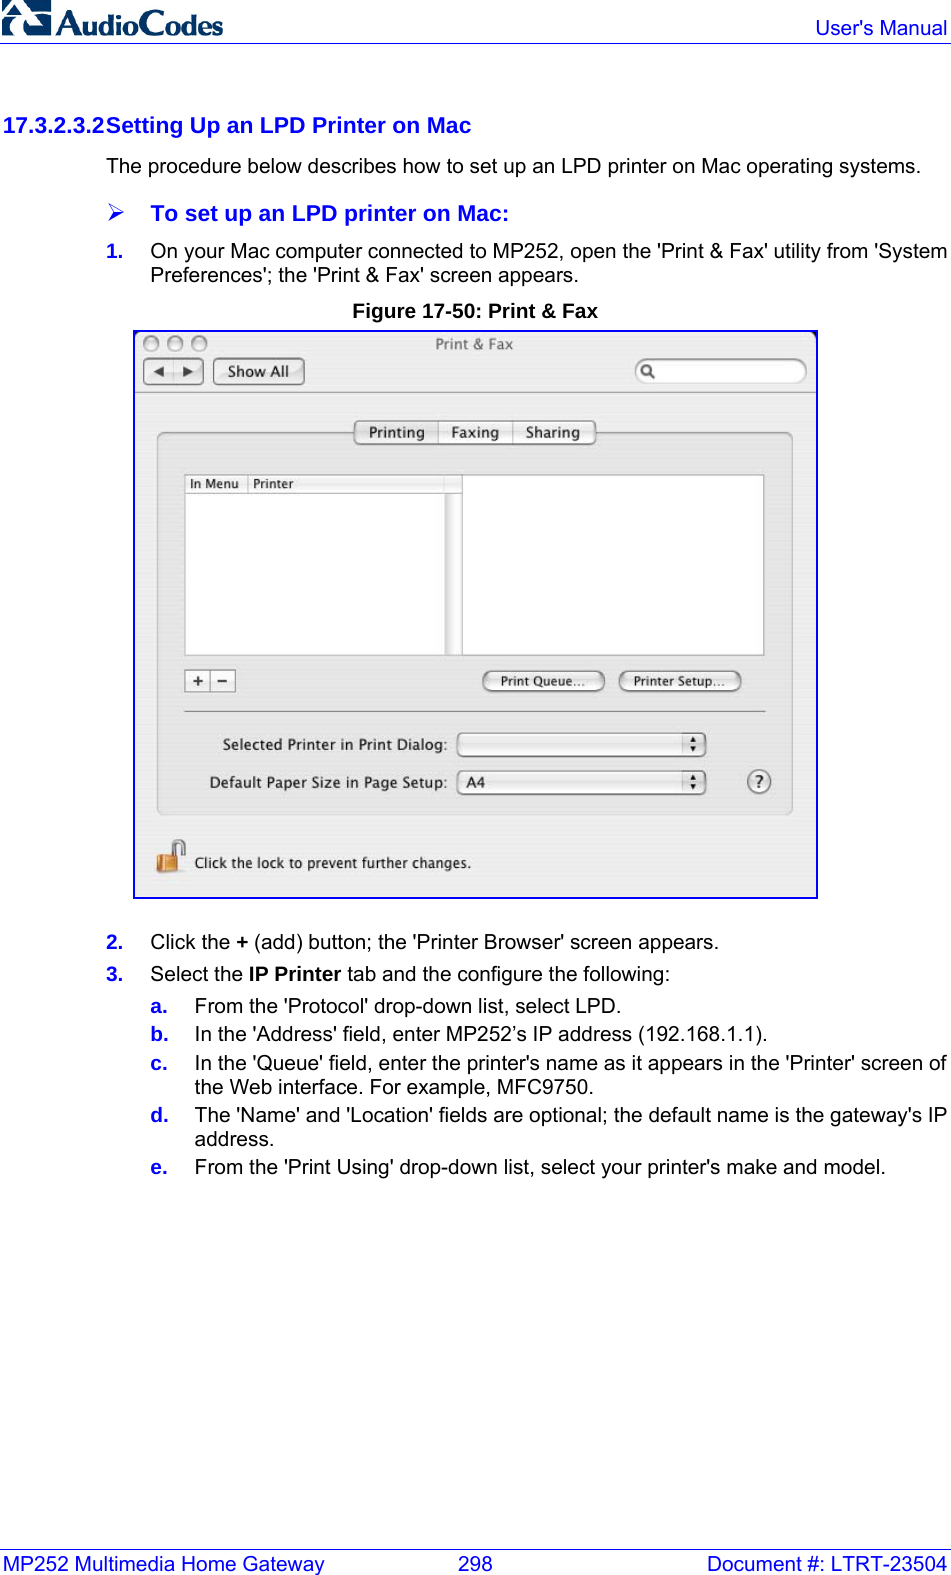 MP252 Multimedia Home Gateway  298  Document #: LTRT-23504  User&apos;s Manual  17.3.2.3.2 Setting Up an LPD Printer on Mac The procedure below describes how to set up an LPD printer on Mac operating systems. ¾ To set up an LPD printer on Mac: 1.  On your Mac computer connected to MP252, open the &apos;Print &amp; Fax&apos; utility from &apos;System Preferences&apos;; the &apos;Print &amp; Fax&apos; screen appears. Figure 17-50: Print &amp; Fax  2.  Click the + (add) button; the &apos;Printer Browser&apos; screen appears.  3.  Select the IP Printer tab and the configure the following: a.  From the &apos;Protocol&apos; drop-down list, select LPD. b.  In the &apos;Address&apos; field, enter MP252’s IP address (192.168.1.1). c.  In the &apos;Queue&apos; field, enter the printer&apos;s name as it appears in the &apos;Printer&apos; screen of the Web interface. For example, MFC9750. d.  The &apos;Name&apos; and &apos;Location&apos; fields are optional; the default name is the gateway&apos;s IP address. e.  From the &apos;Print Using&apos; drop-down list, select your printer&apos;s make and model. 